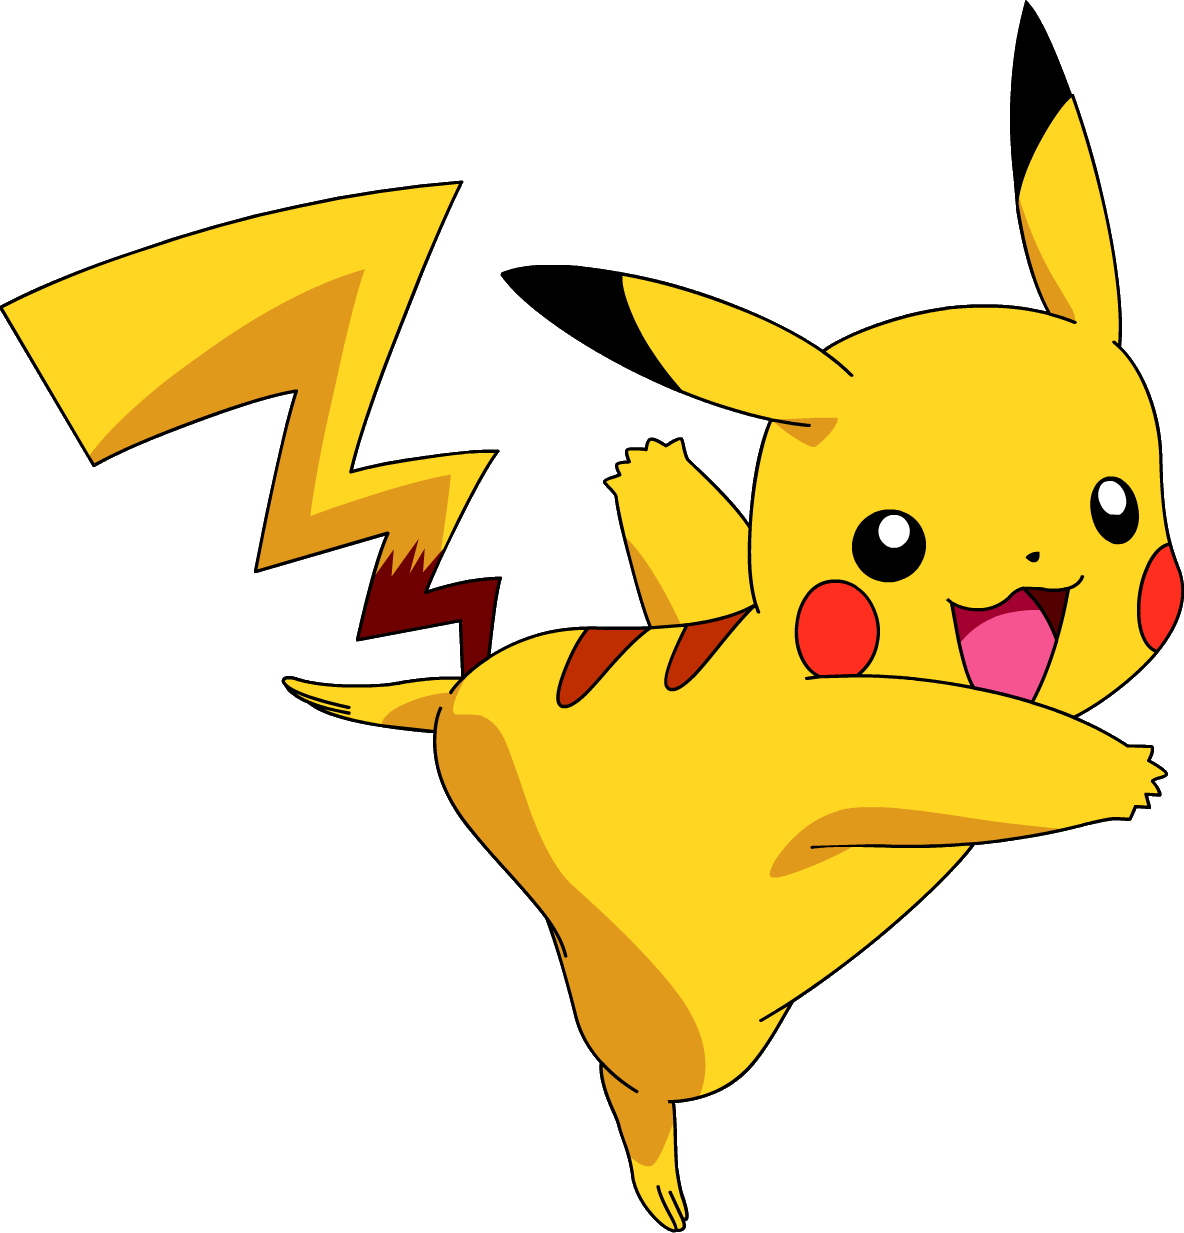 Pikachu Clipart Roblox Pikachu Roblox Transparent Free For Download On Webstockreview 2020 - pikachu pintar amarillo lo que sobra roblox